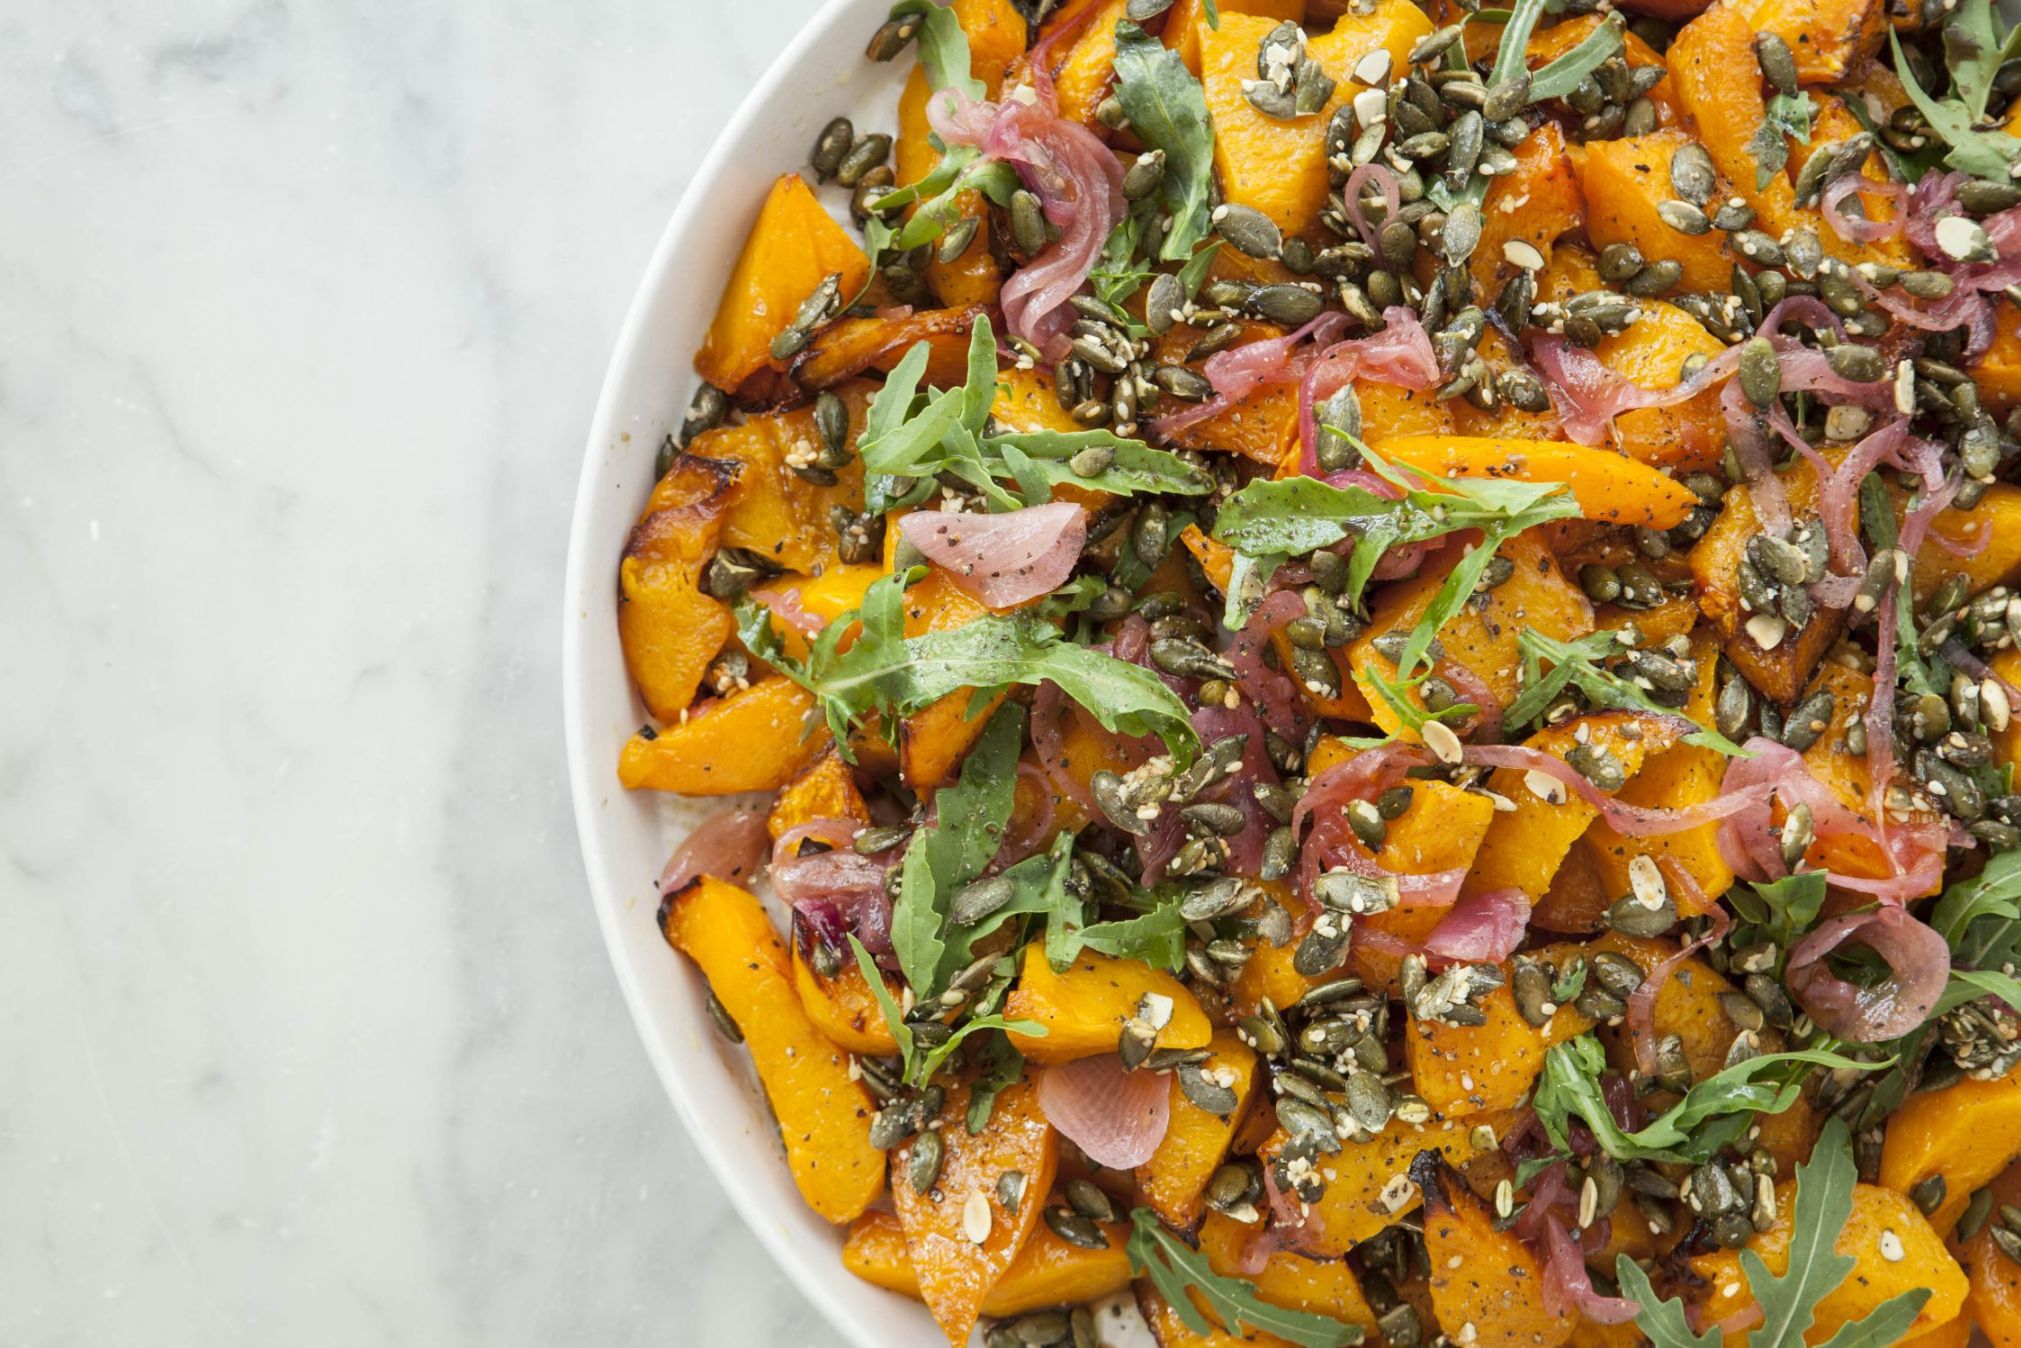 Church Road's salad of roasted squash, red onions, rocket and seeds 